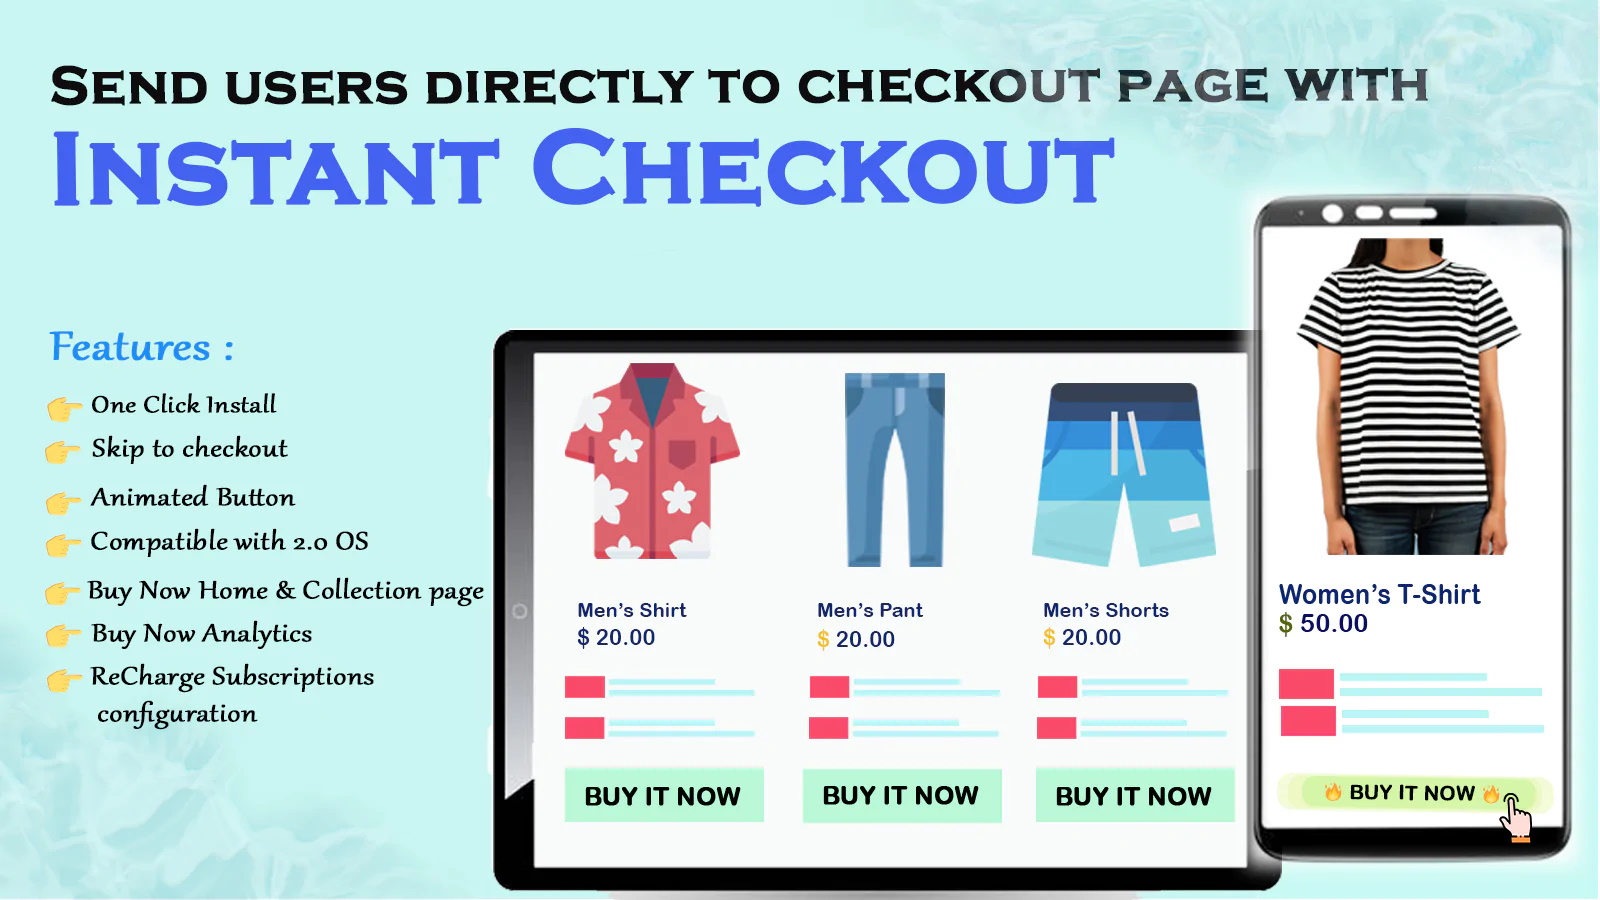 Instant Checkout ‑ Buy button